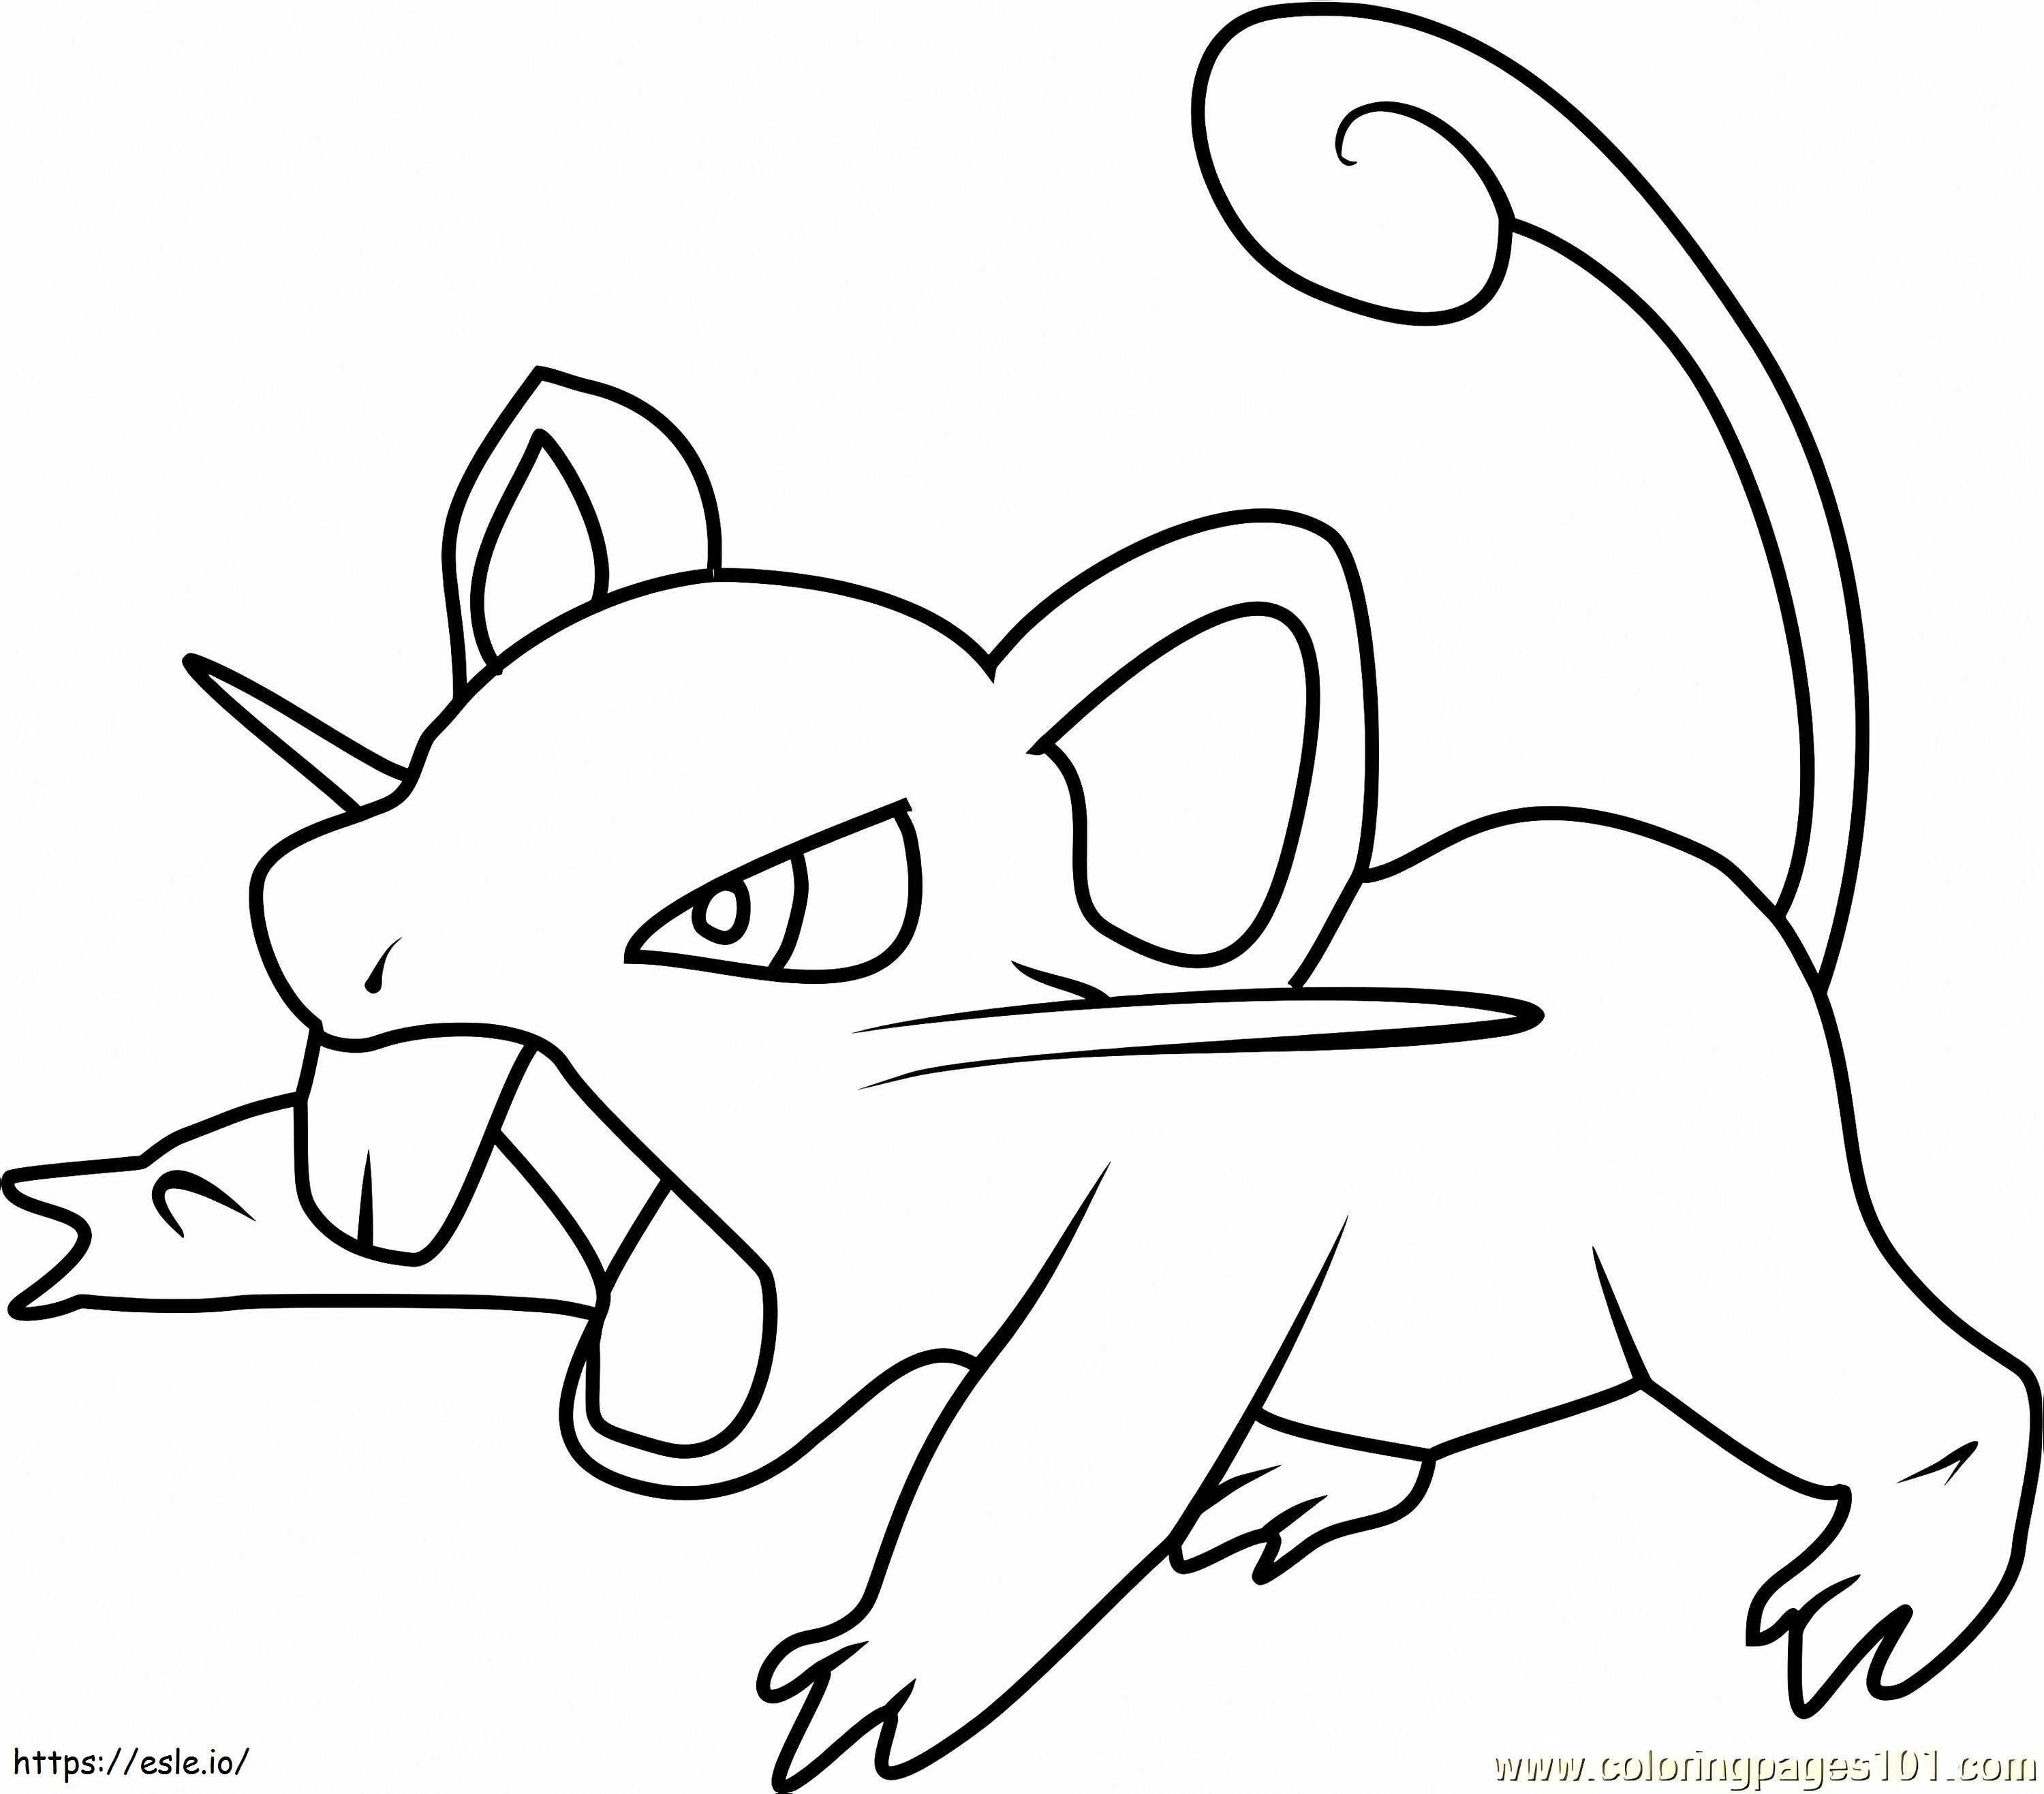 1529718540_50 coloring page